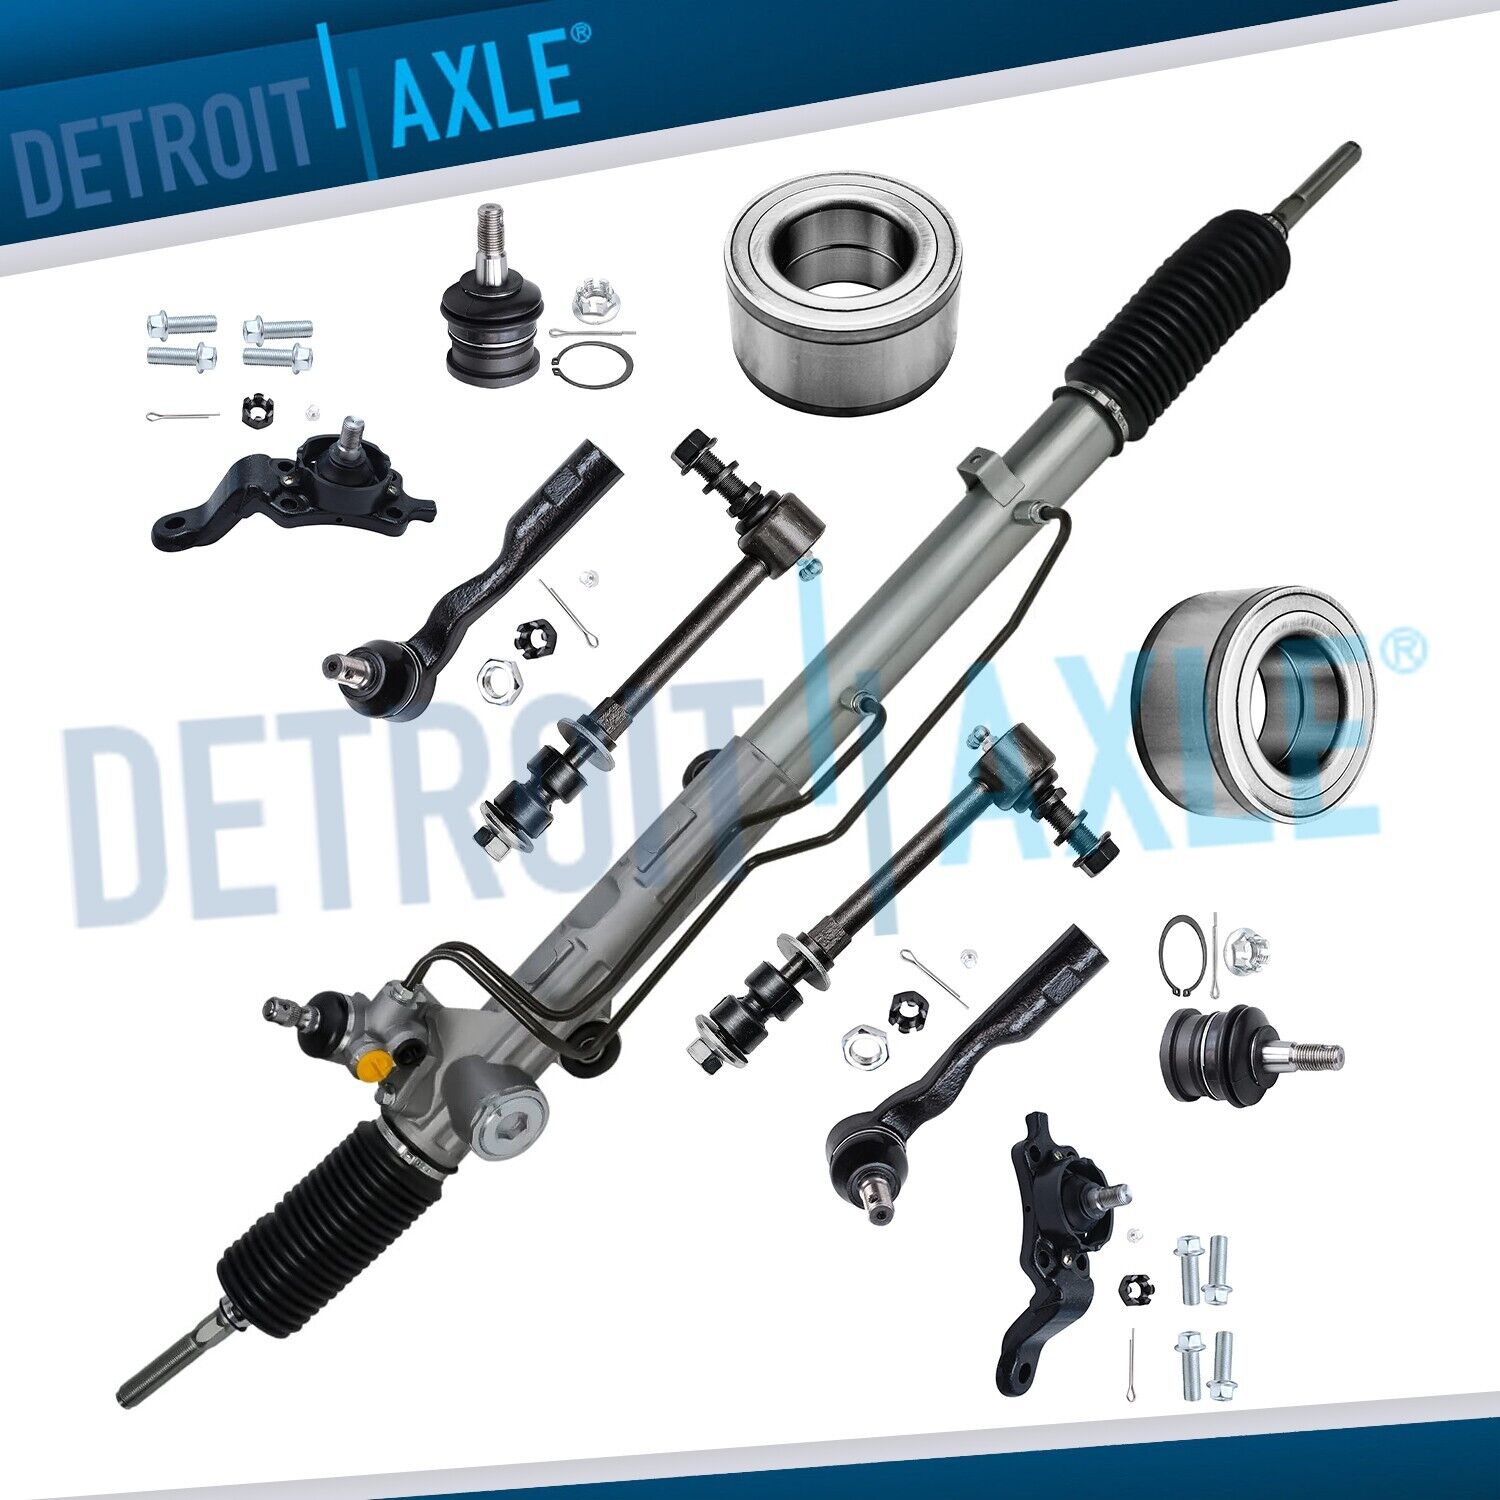 For 2004-2006 Sequoia Complete Power Steering Rack and Pinion Wheel Bearing Kit